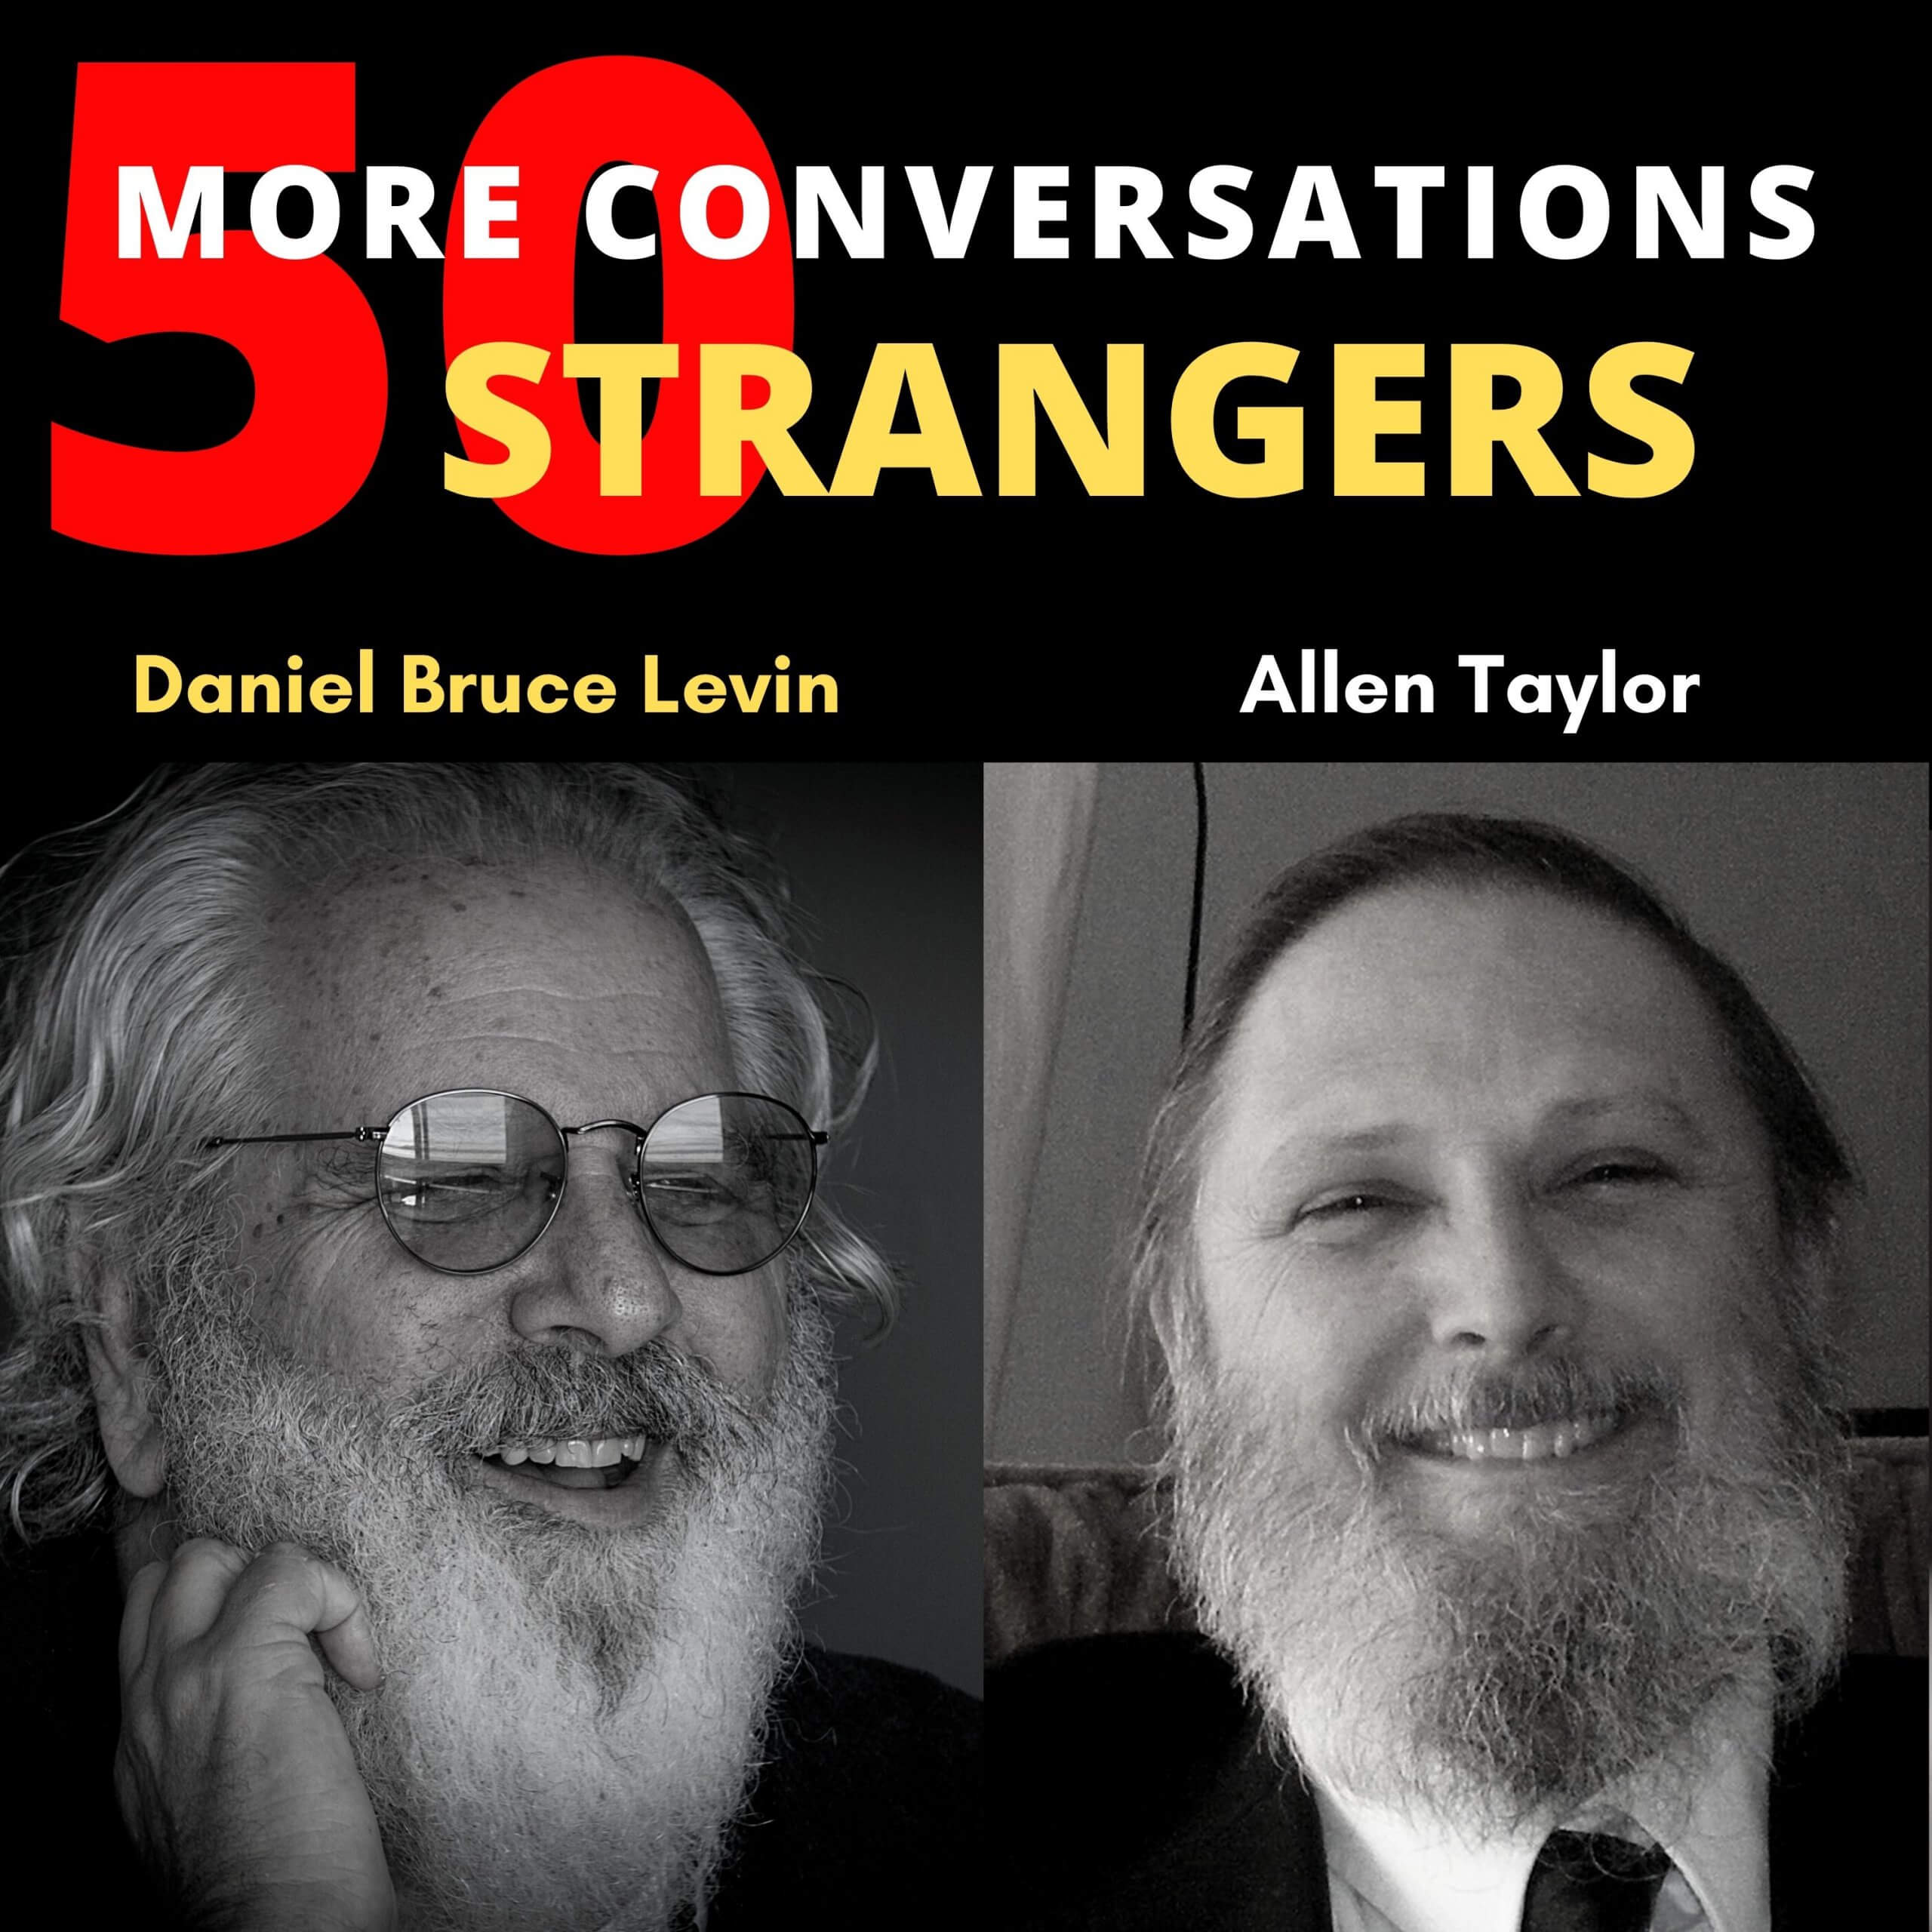 50 More Conversations with 50 More Strangers with Allen Taylor